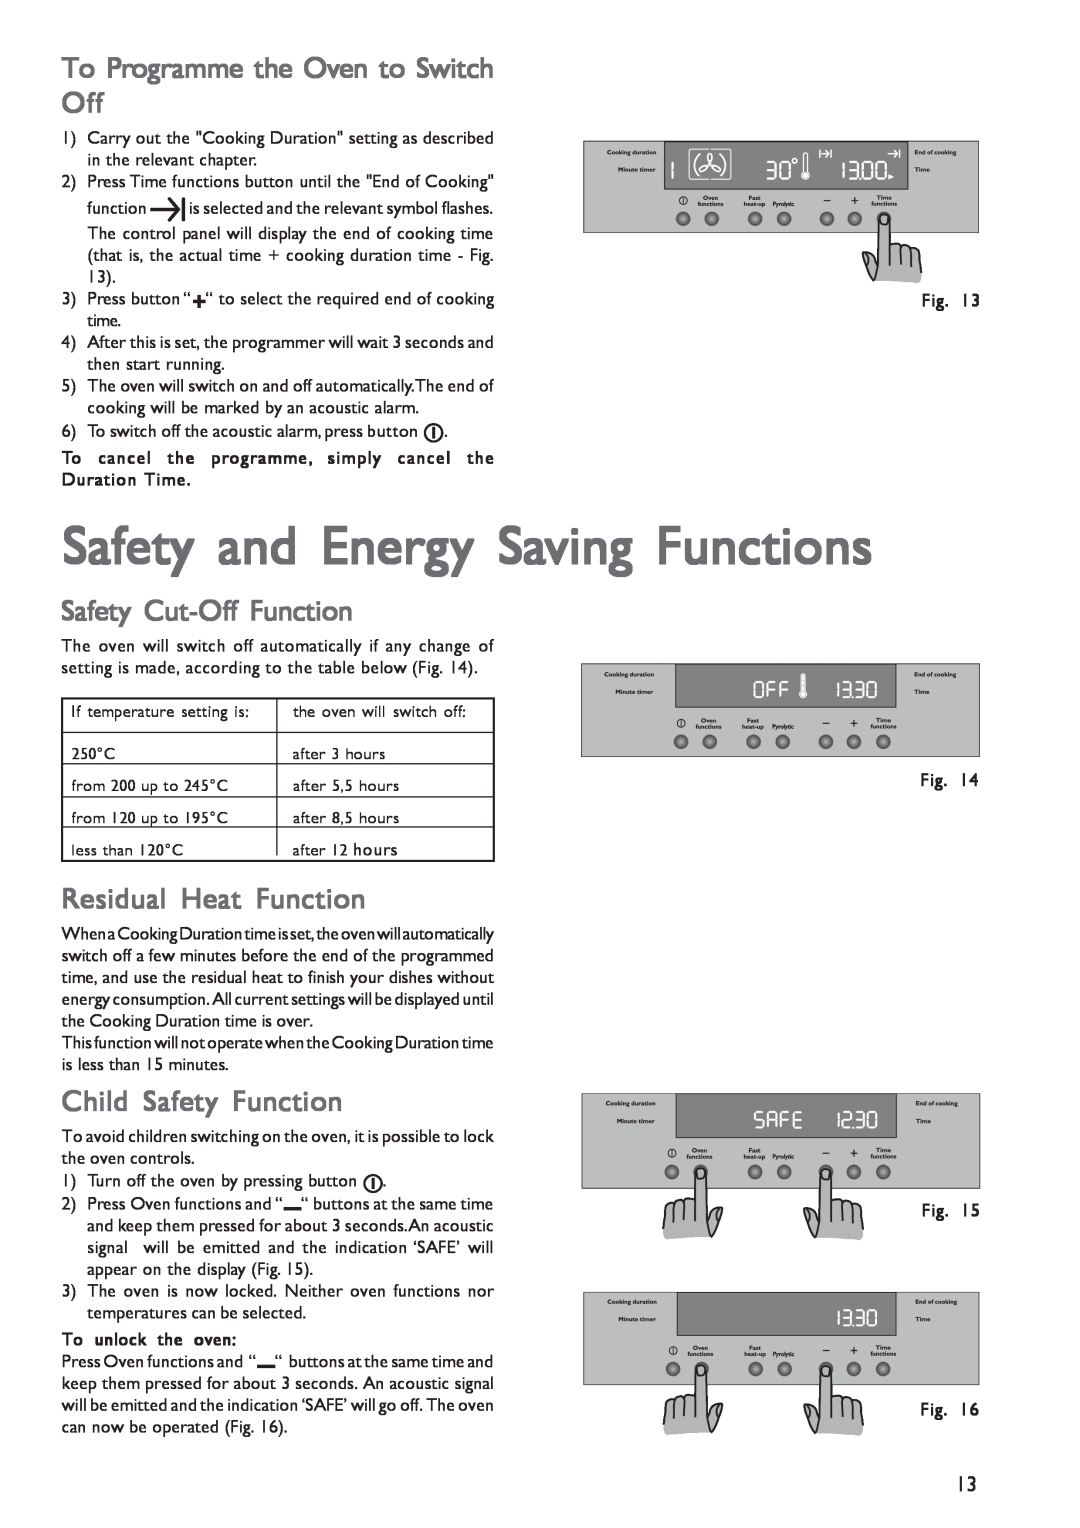 John Lewis JLBIOS603 Safety and Energy Saving Functions, To Programme the Oven to Switch Off, Safety Cut-OffFunction 